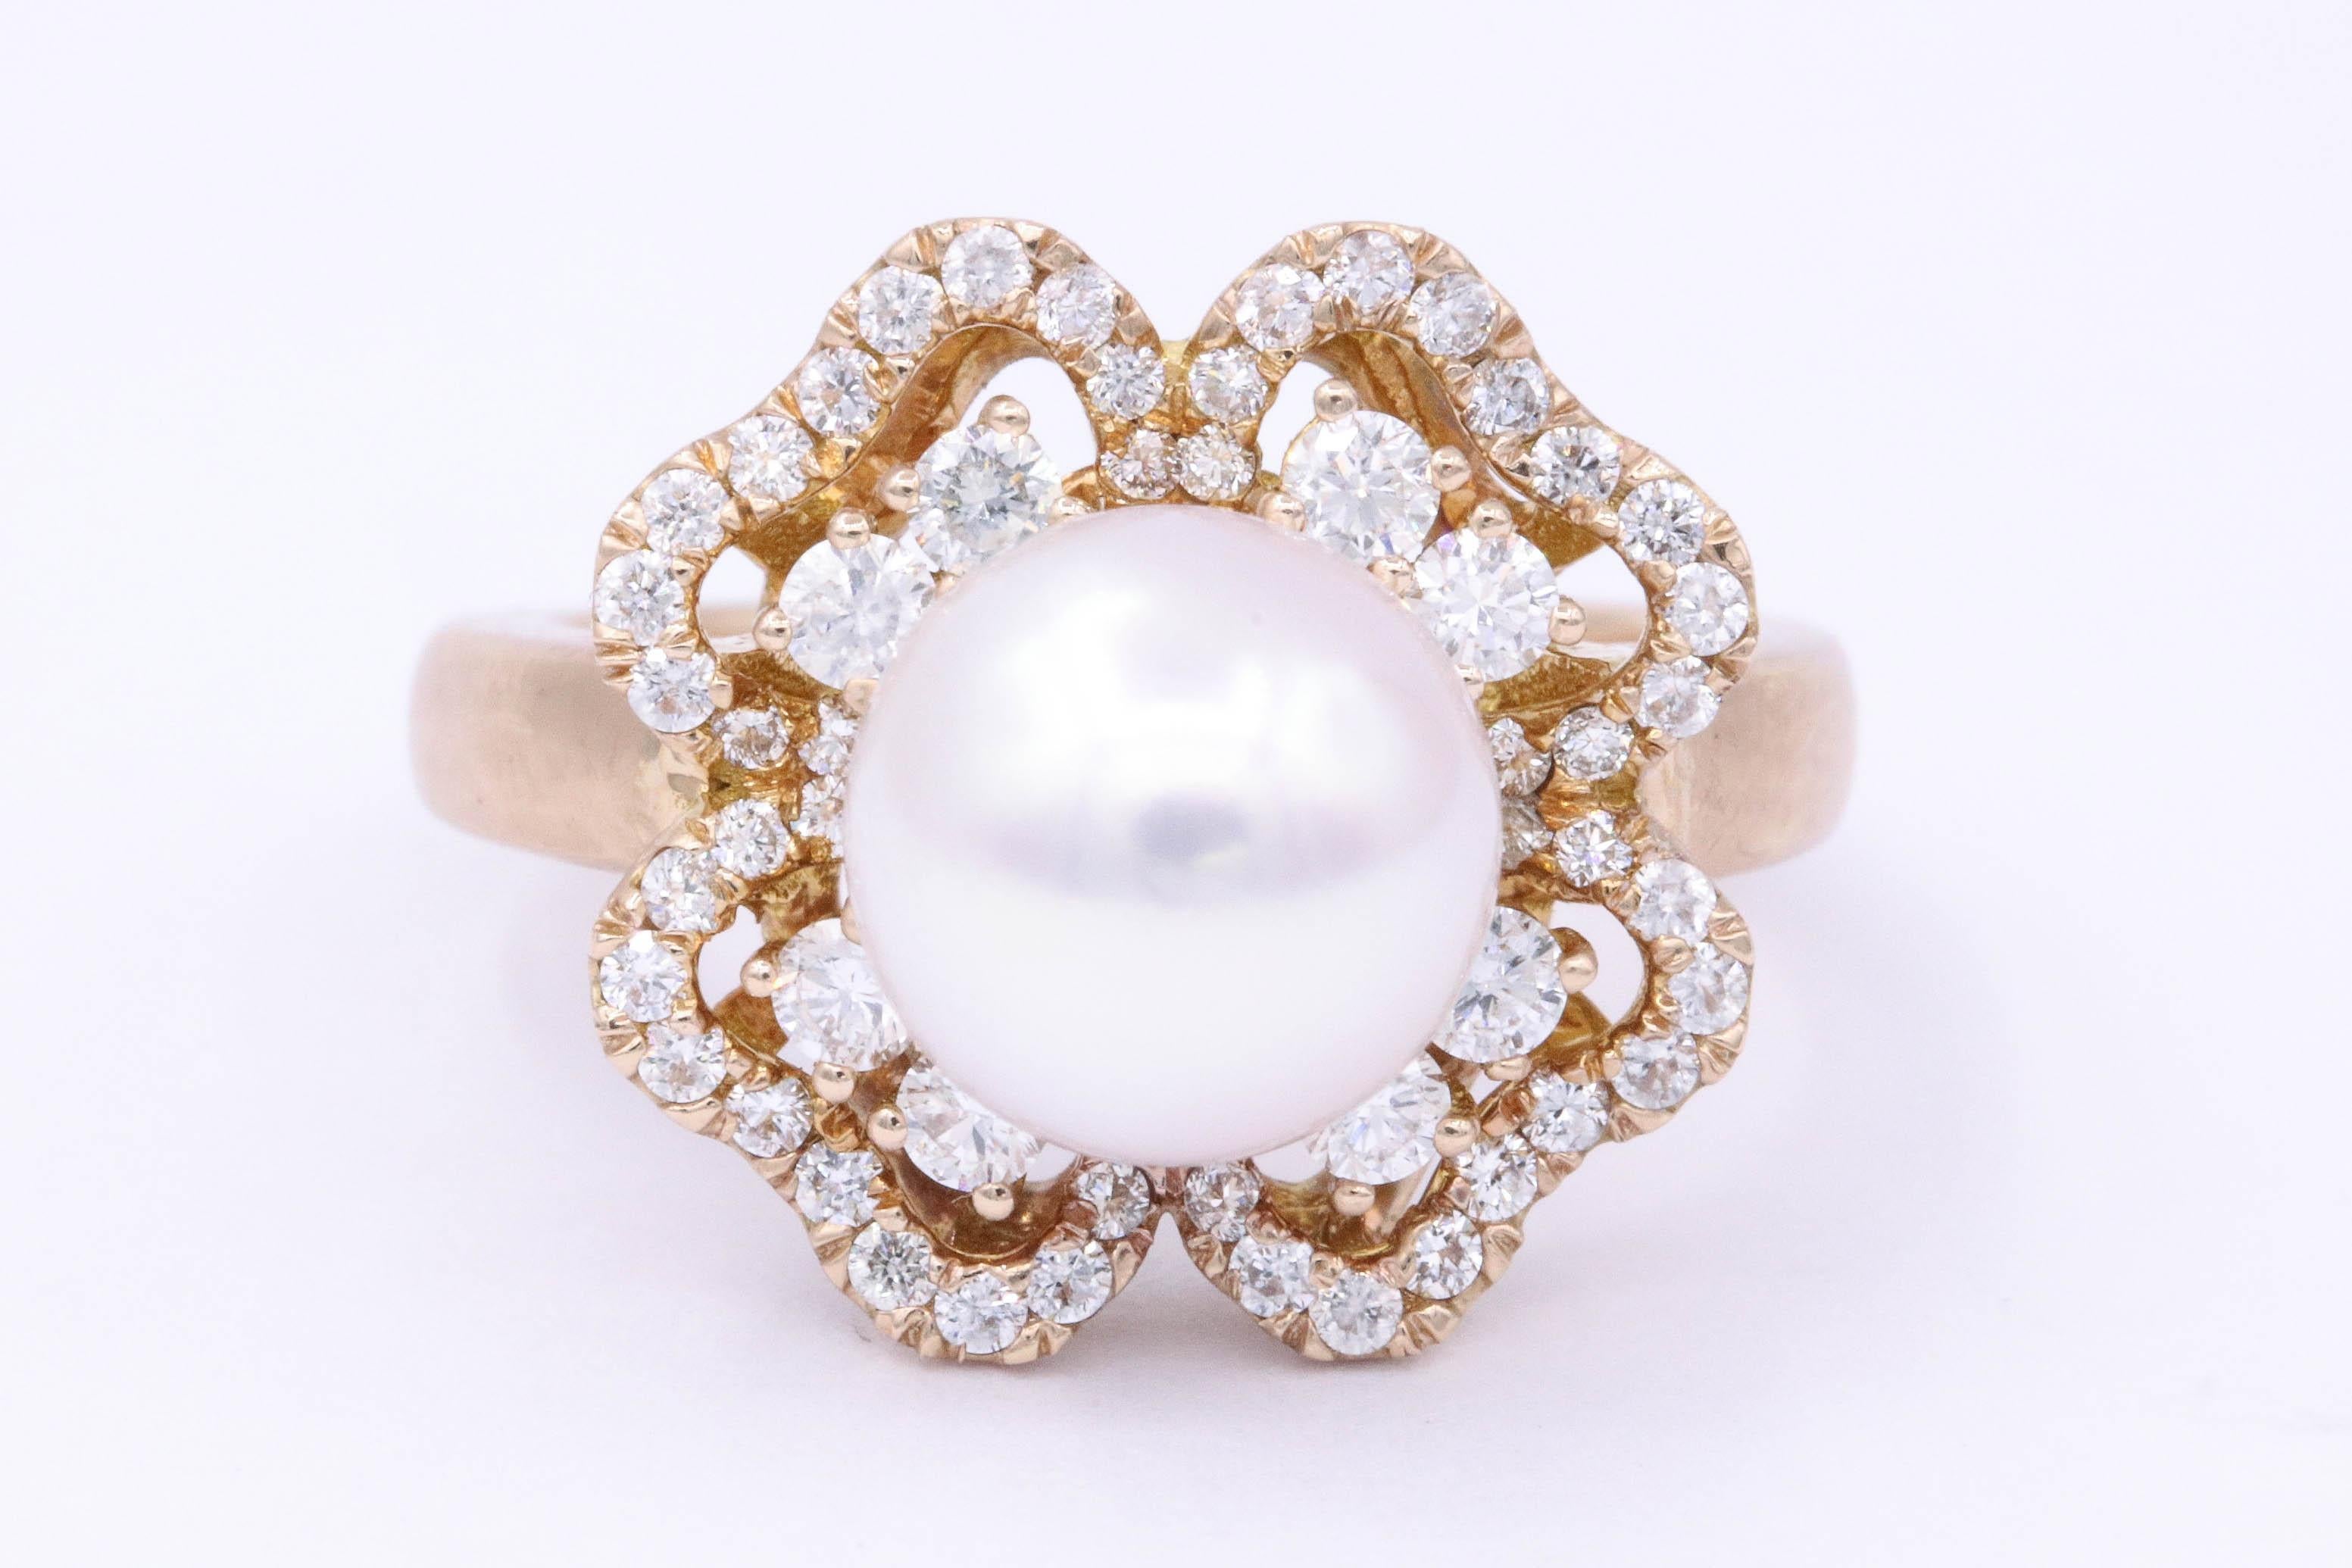 18K Rose gold featuring 0.74 round diamond F-G SI Quality
Akoya white Japanese pearl with pink overtone 9mm
Size 6 
We can order it in your size  or we will re size it fee of charge 